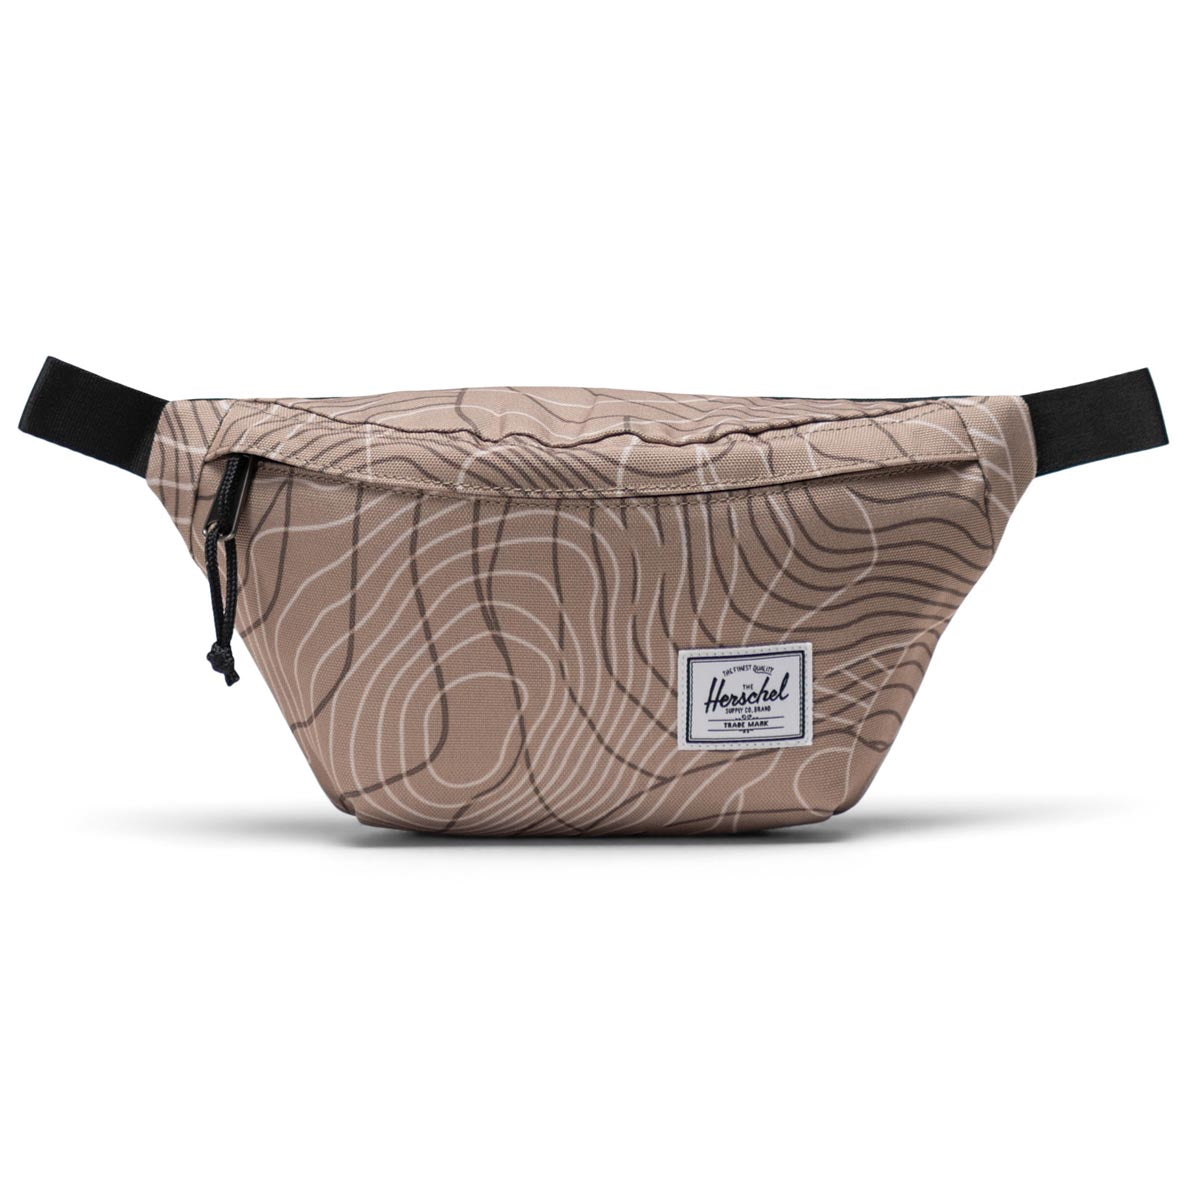 Herschel Supply Classic Hip Bag - Twill Topography image 1